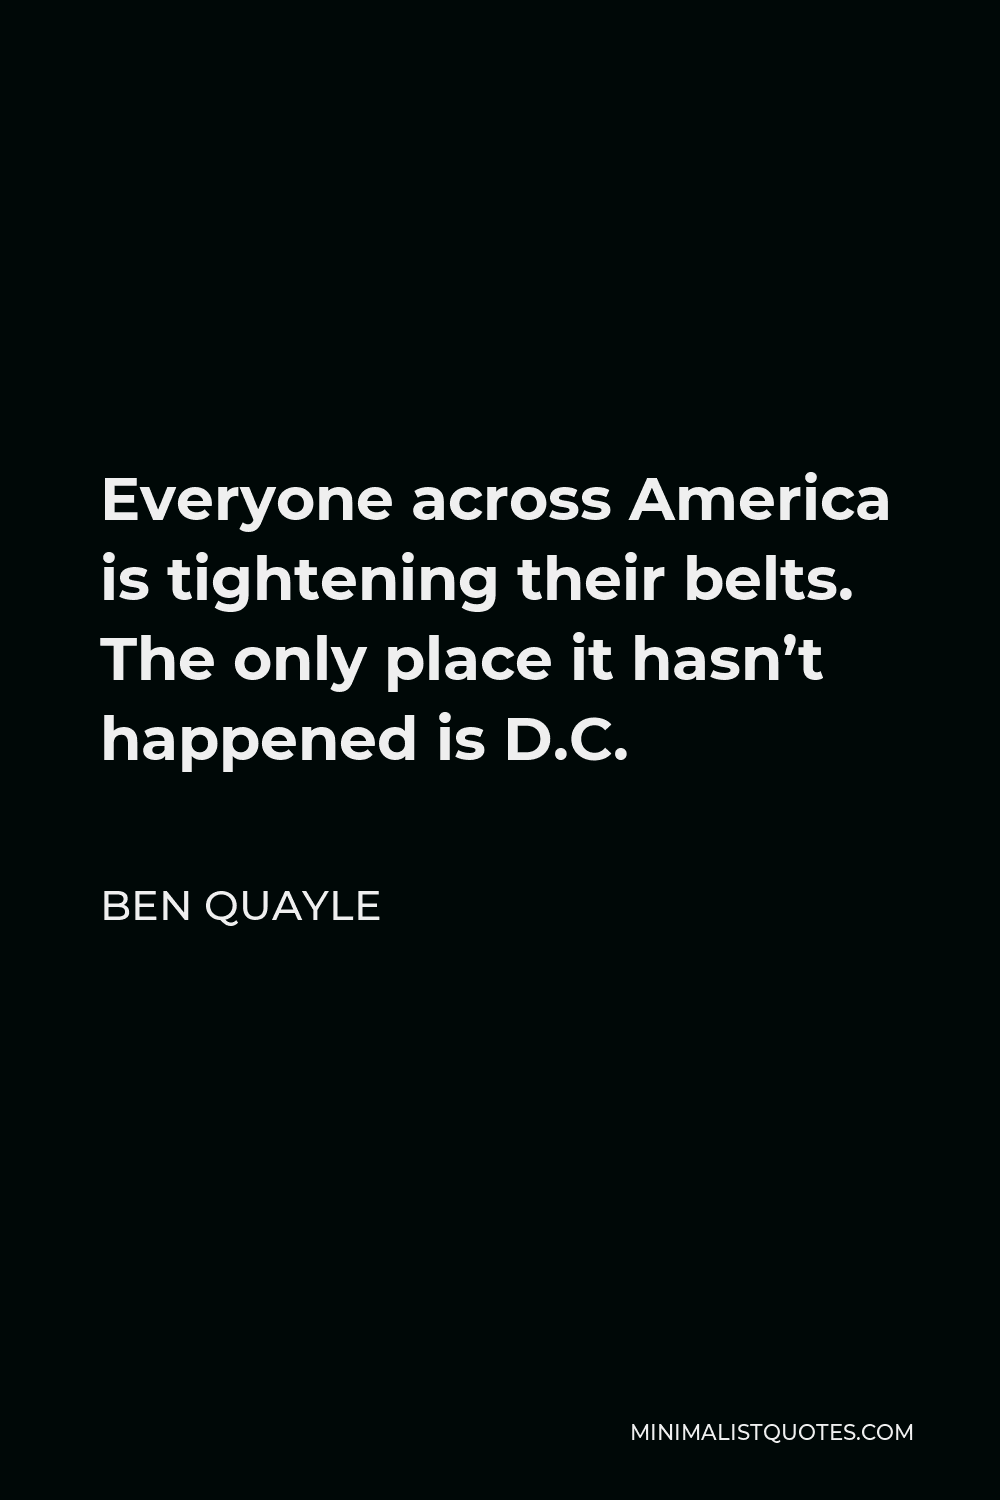 Ben Quayle Quote - Everyone across America is tightening their belts. The only place it hasn’t happened is D.C.